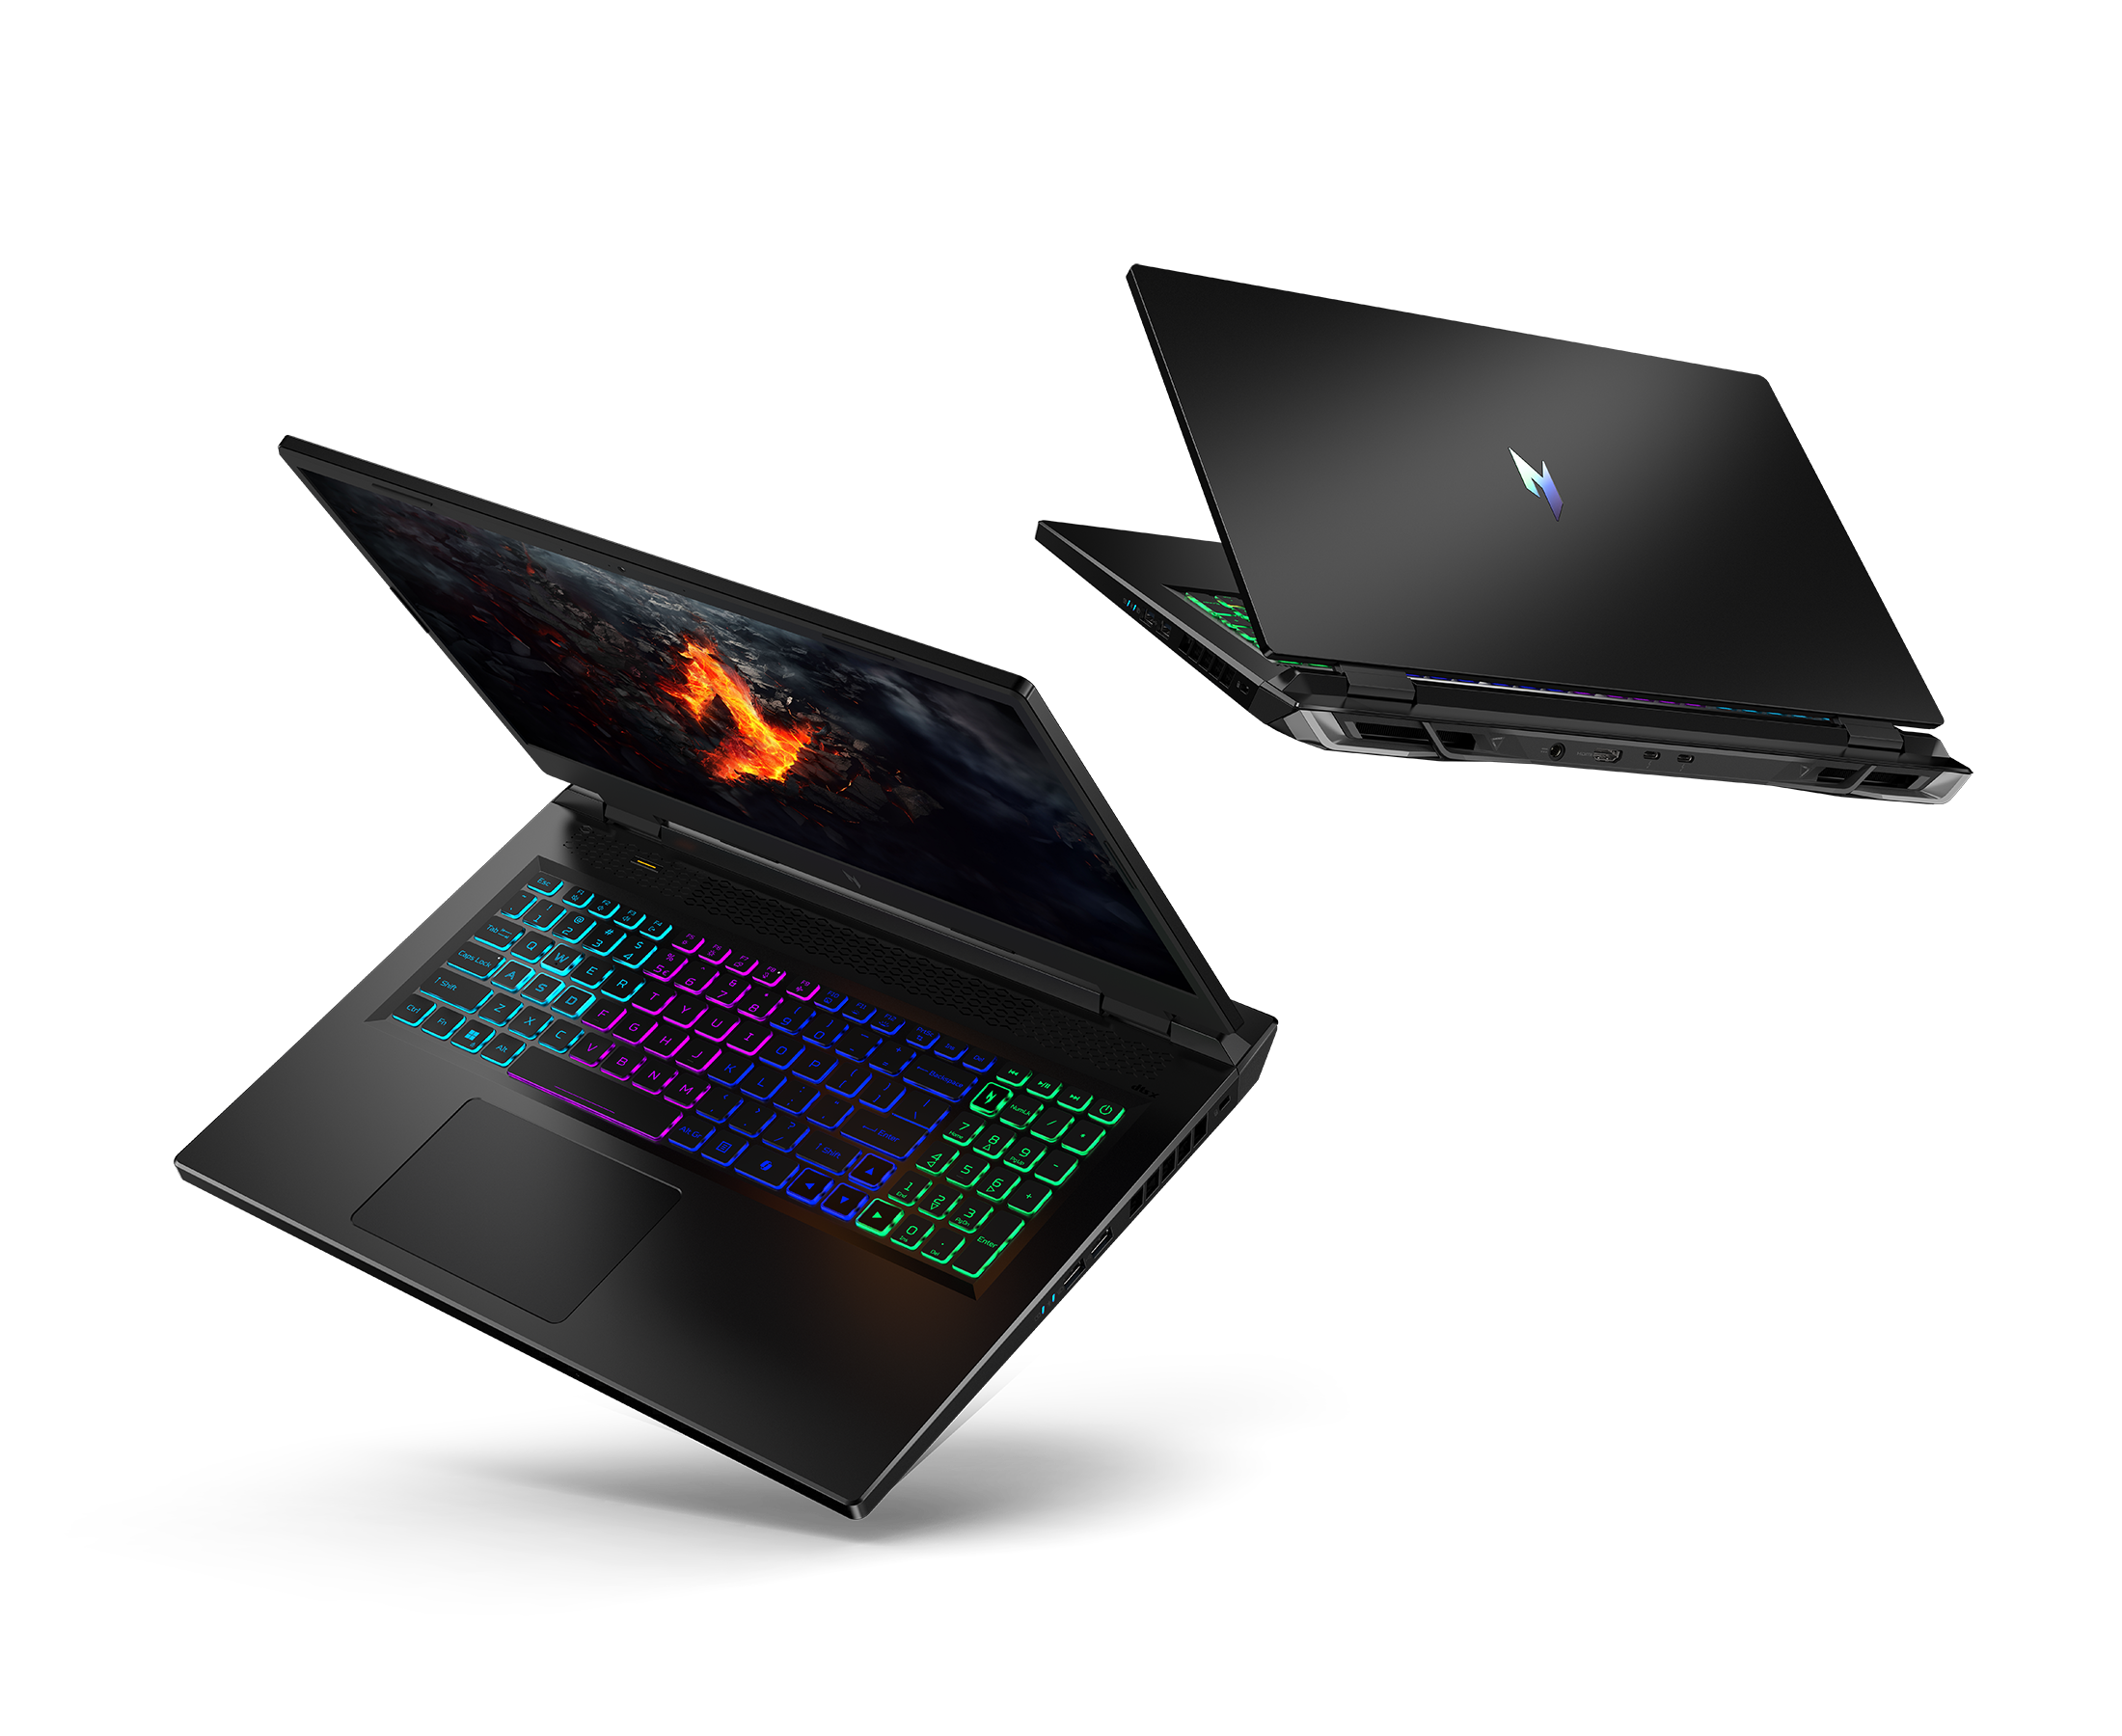 Acer Announces New Nitro 17 Gaming Laptop with Latest Intel Core 14th Gen Processors and NVIDIA GeForce RTX 40 Series Laptop GPUs